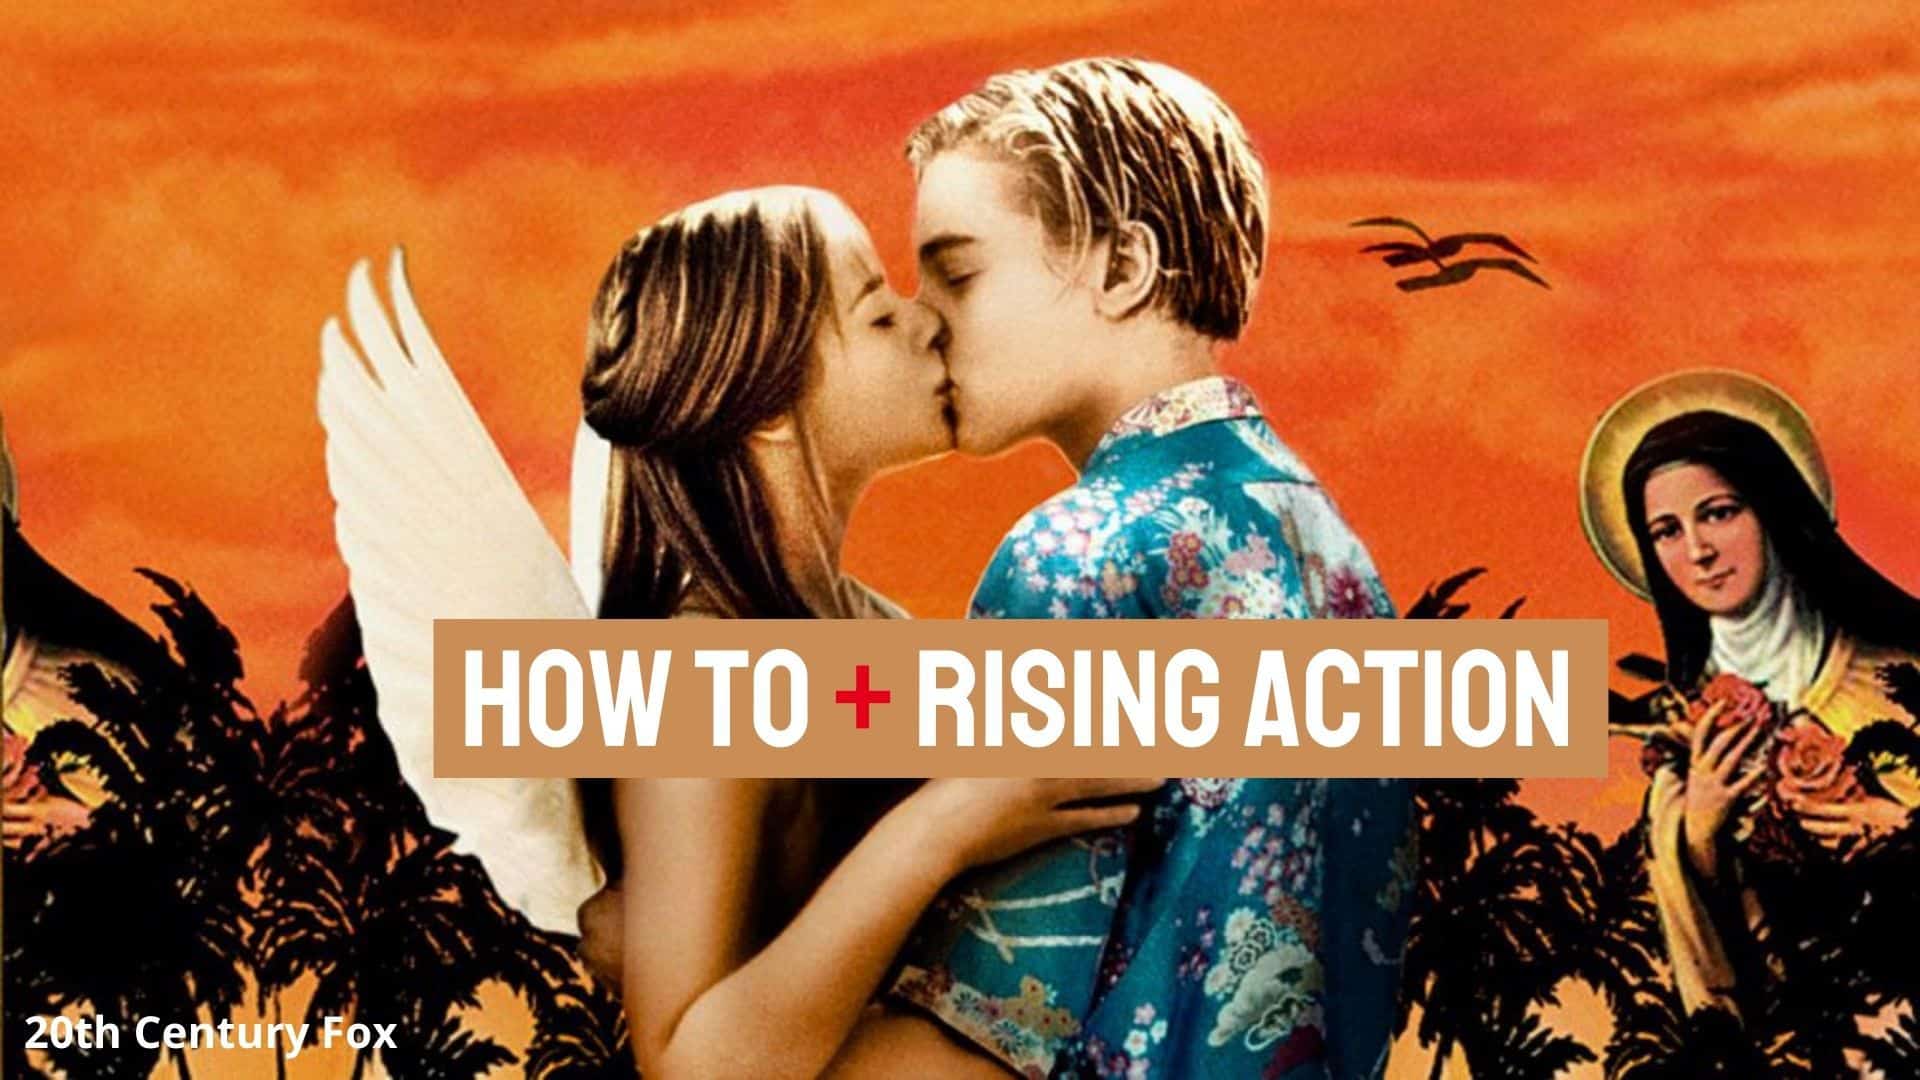 Rising Action Definition and Examples - Poem Analysis